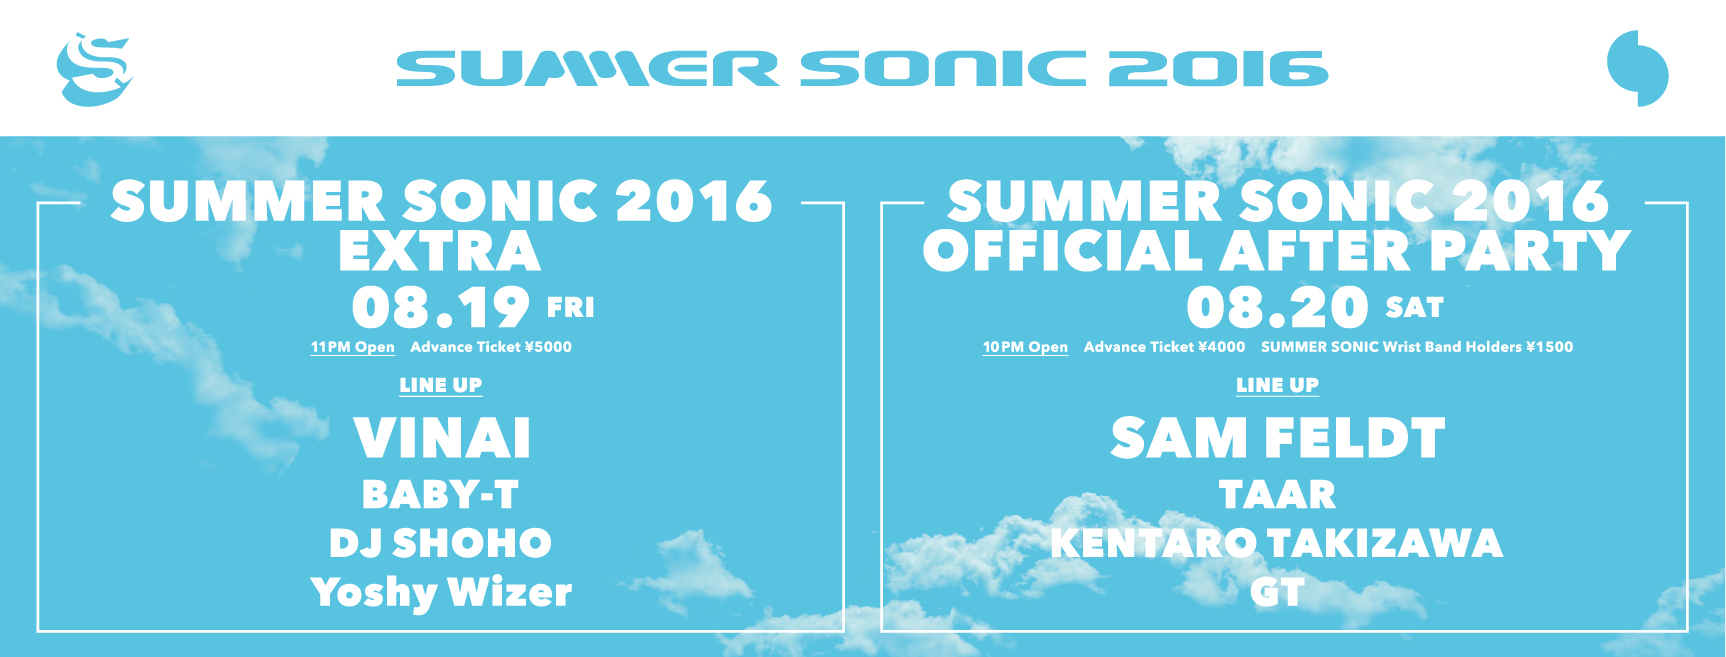 SUMMER SONIC 2016 party